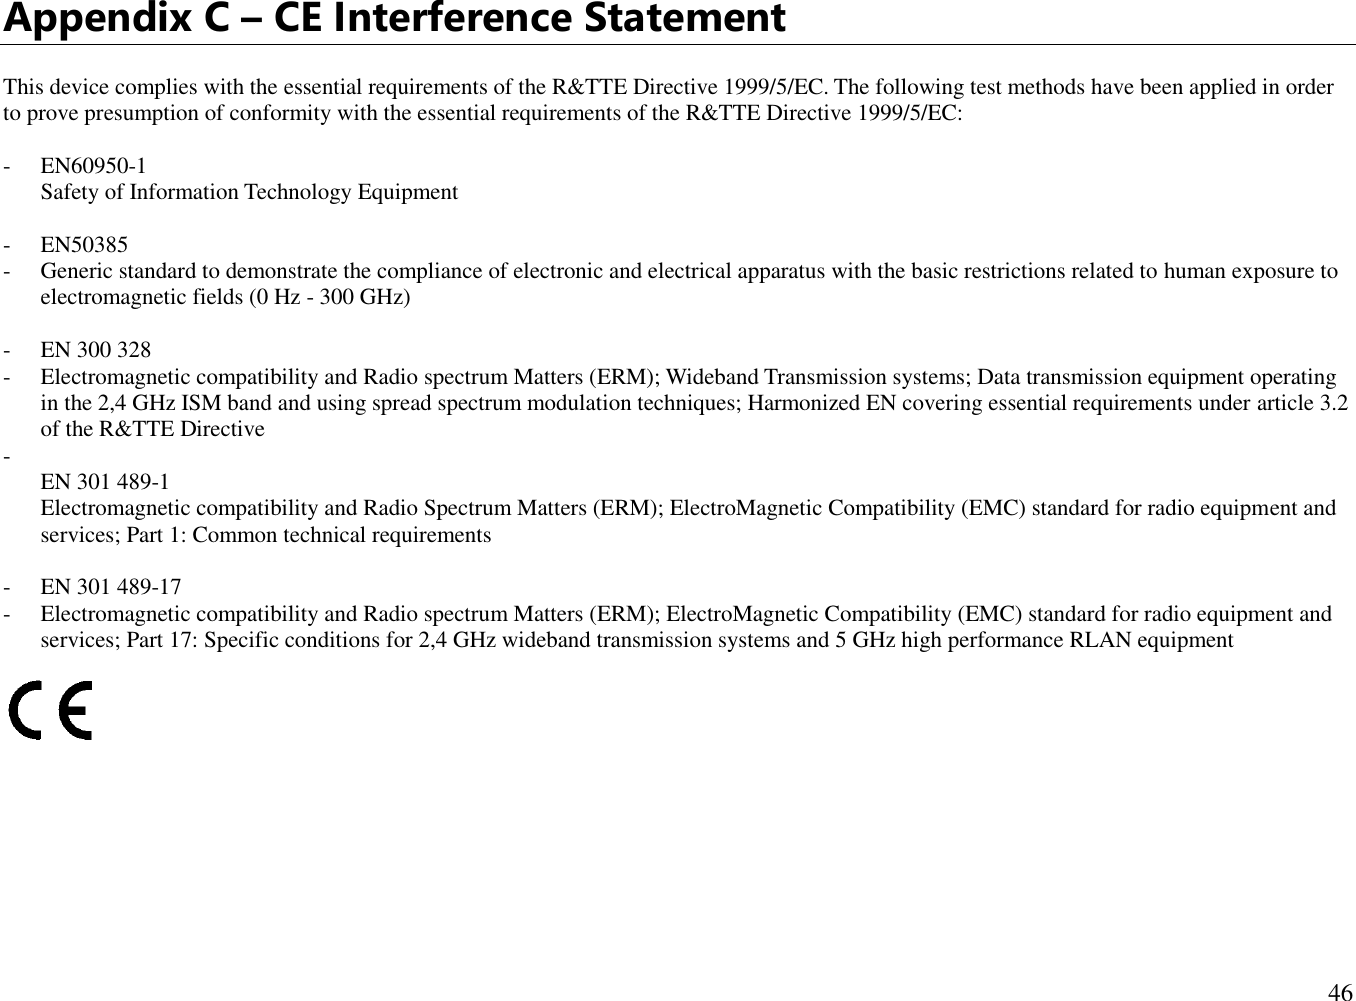  46  Appendix C – CE Interference Statement  This device complies with the essential requirements of the R&amp;TTE Directive 1999/5/EC. The following test methods have been applied in order to prove presumption of conformity with the essential requirements of the R&amp;TTE Directive 1999/5/EC:  - EN60950-1 Safety of Information Technology Equipment  - EN50385  - Generic standard to demonstrate the compliance of electronic and electrical apparatus with the basic restrictions related to human exposure to electromagnetic fields (0 Hz - 300 GHz)  - EN 300 328  - Electromagnetic compatibility and Radio spectrum Matters (ERM); Wideband Transmission systems; Data transmission equipment operating in the 2,4 GHz ISM band and using spread spectrum modulation techniques; Harmonized EN covering essential requirements under article 3.2 of the R&amp;TTE Directive -  EN 301 489-1  Electromagnetic compatibility and Radio Spectrum Matters (ERM); ElectroMagnetic Compatibility (EMC) standard for radio equipment and services; Part 1: Common technical requirements  - EN 301 489-17  - Electromagnetic compatibility and Radio spectrum Matters (ERM); ElectroMagnetic Compatibility (EMC) standard for radio equipment and services; Part 17: Specific conditions for 2,4 GHz wideband transmission systems and 5 GHz high performance RLAN equipment          